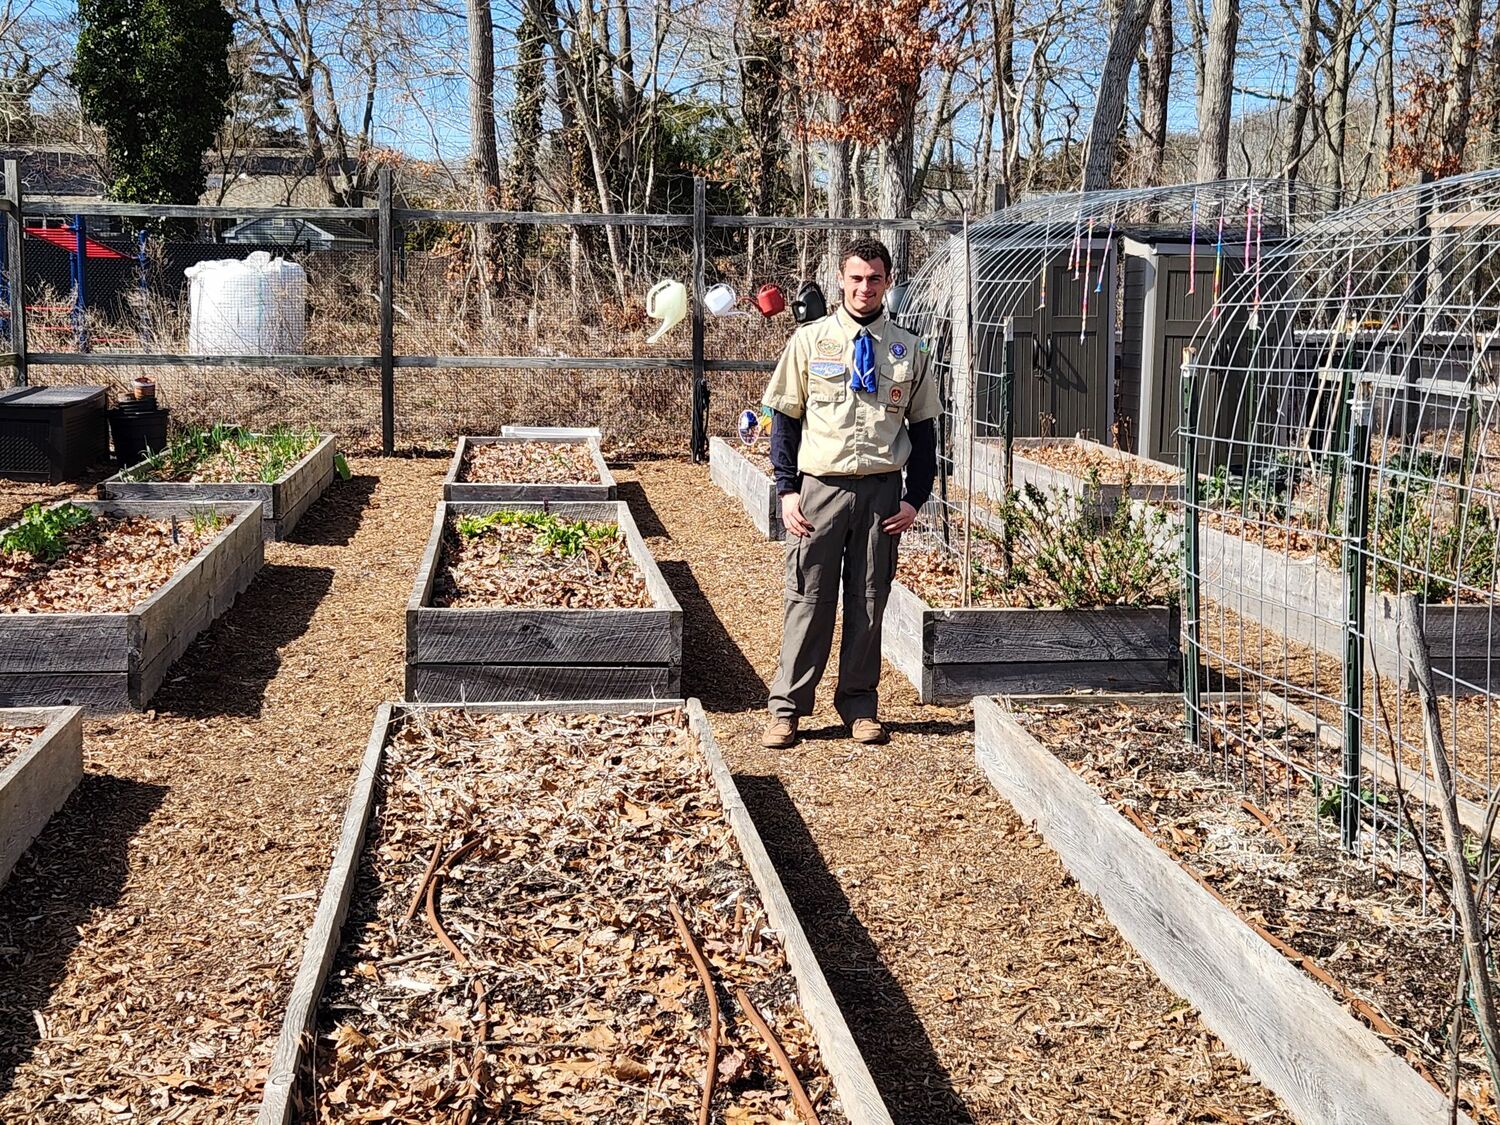 Scout Christian Capolino, a sophomore at Eastport-South Manor Jr.-Sr. High
School, led Troop 221 in the construction of four benches, a flower box with sunflowers, as
well as a sign on the entrance gate of the East Quogue School garden as part of an Eagle
Scout project. Together, Christian and Troop 221 cleaned up the area in and around the garden to benefit the school and the community. Florence Lumber, John Linquist and Stephanie Rempe made donations that made the project possible. COURTESY EAST QUOGUE SCHOOL DISTRICT